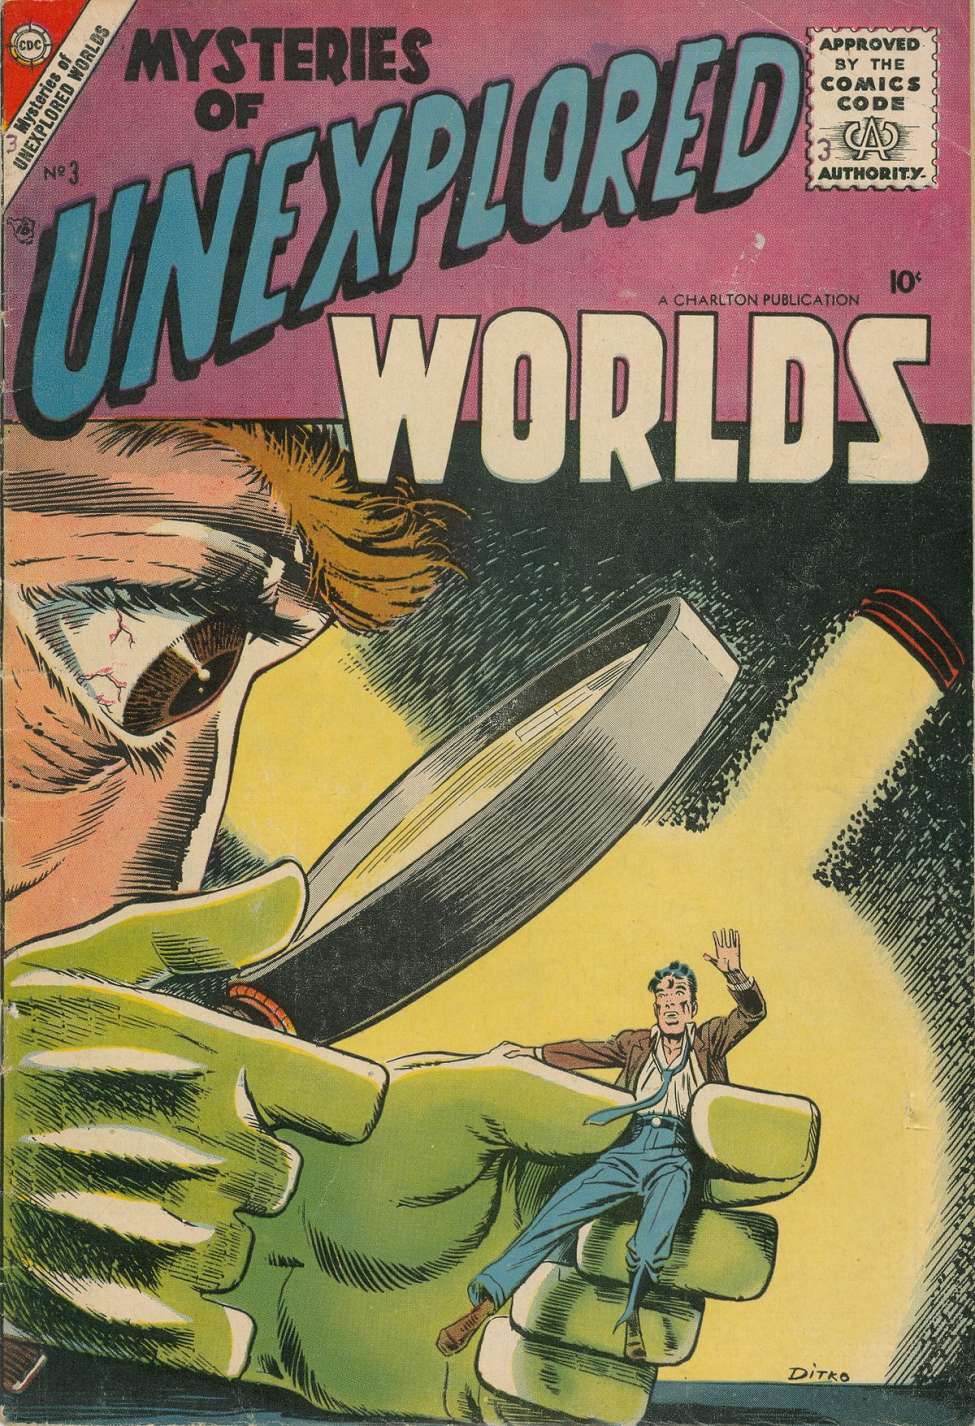 Comic Book Cover For Mysteries of Unexplored Worlds 3